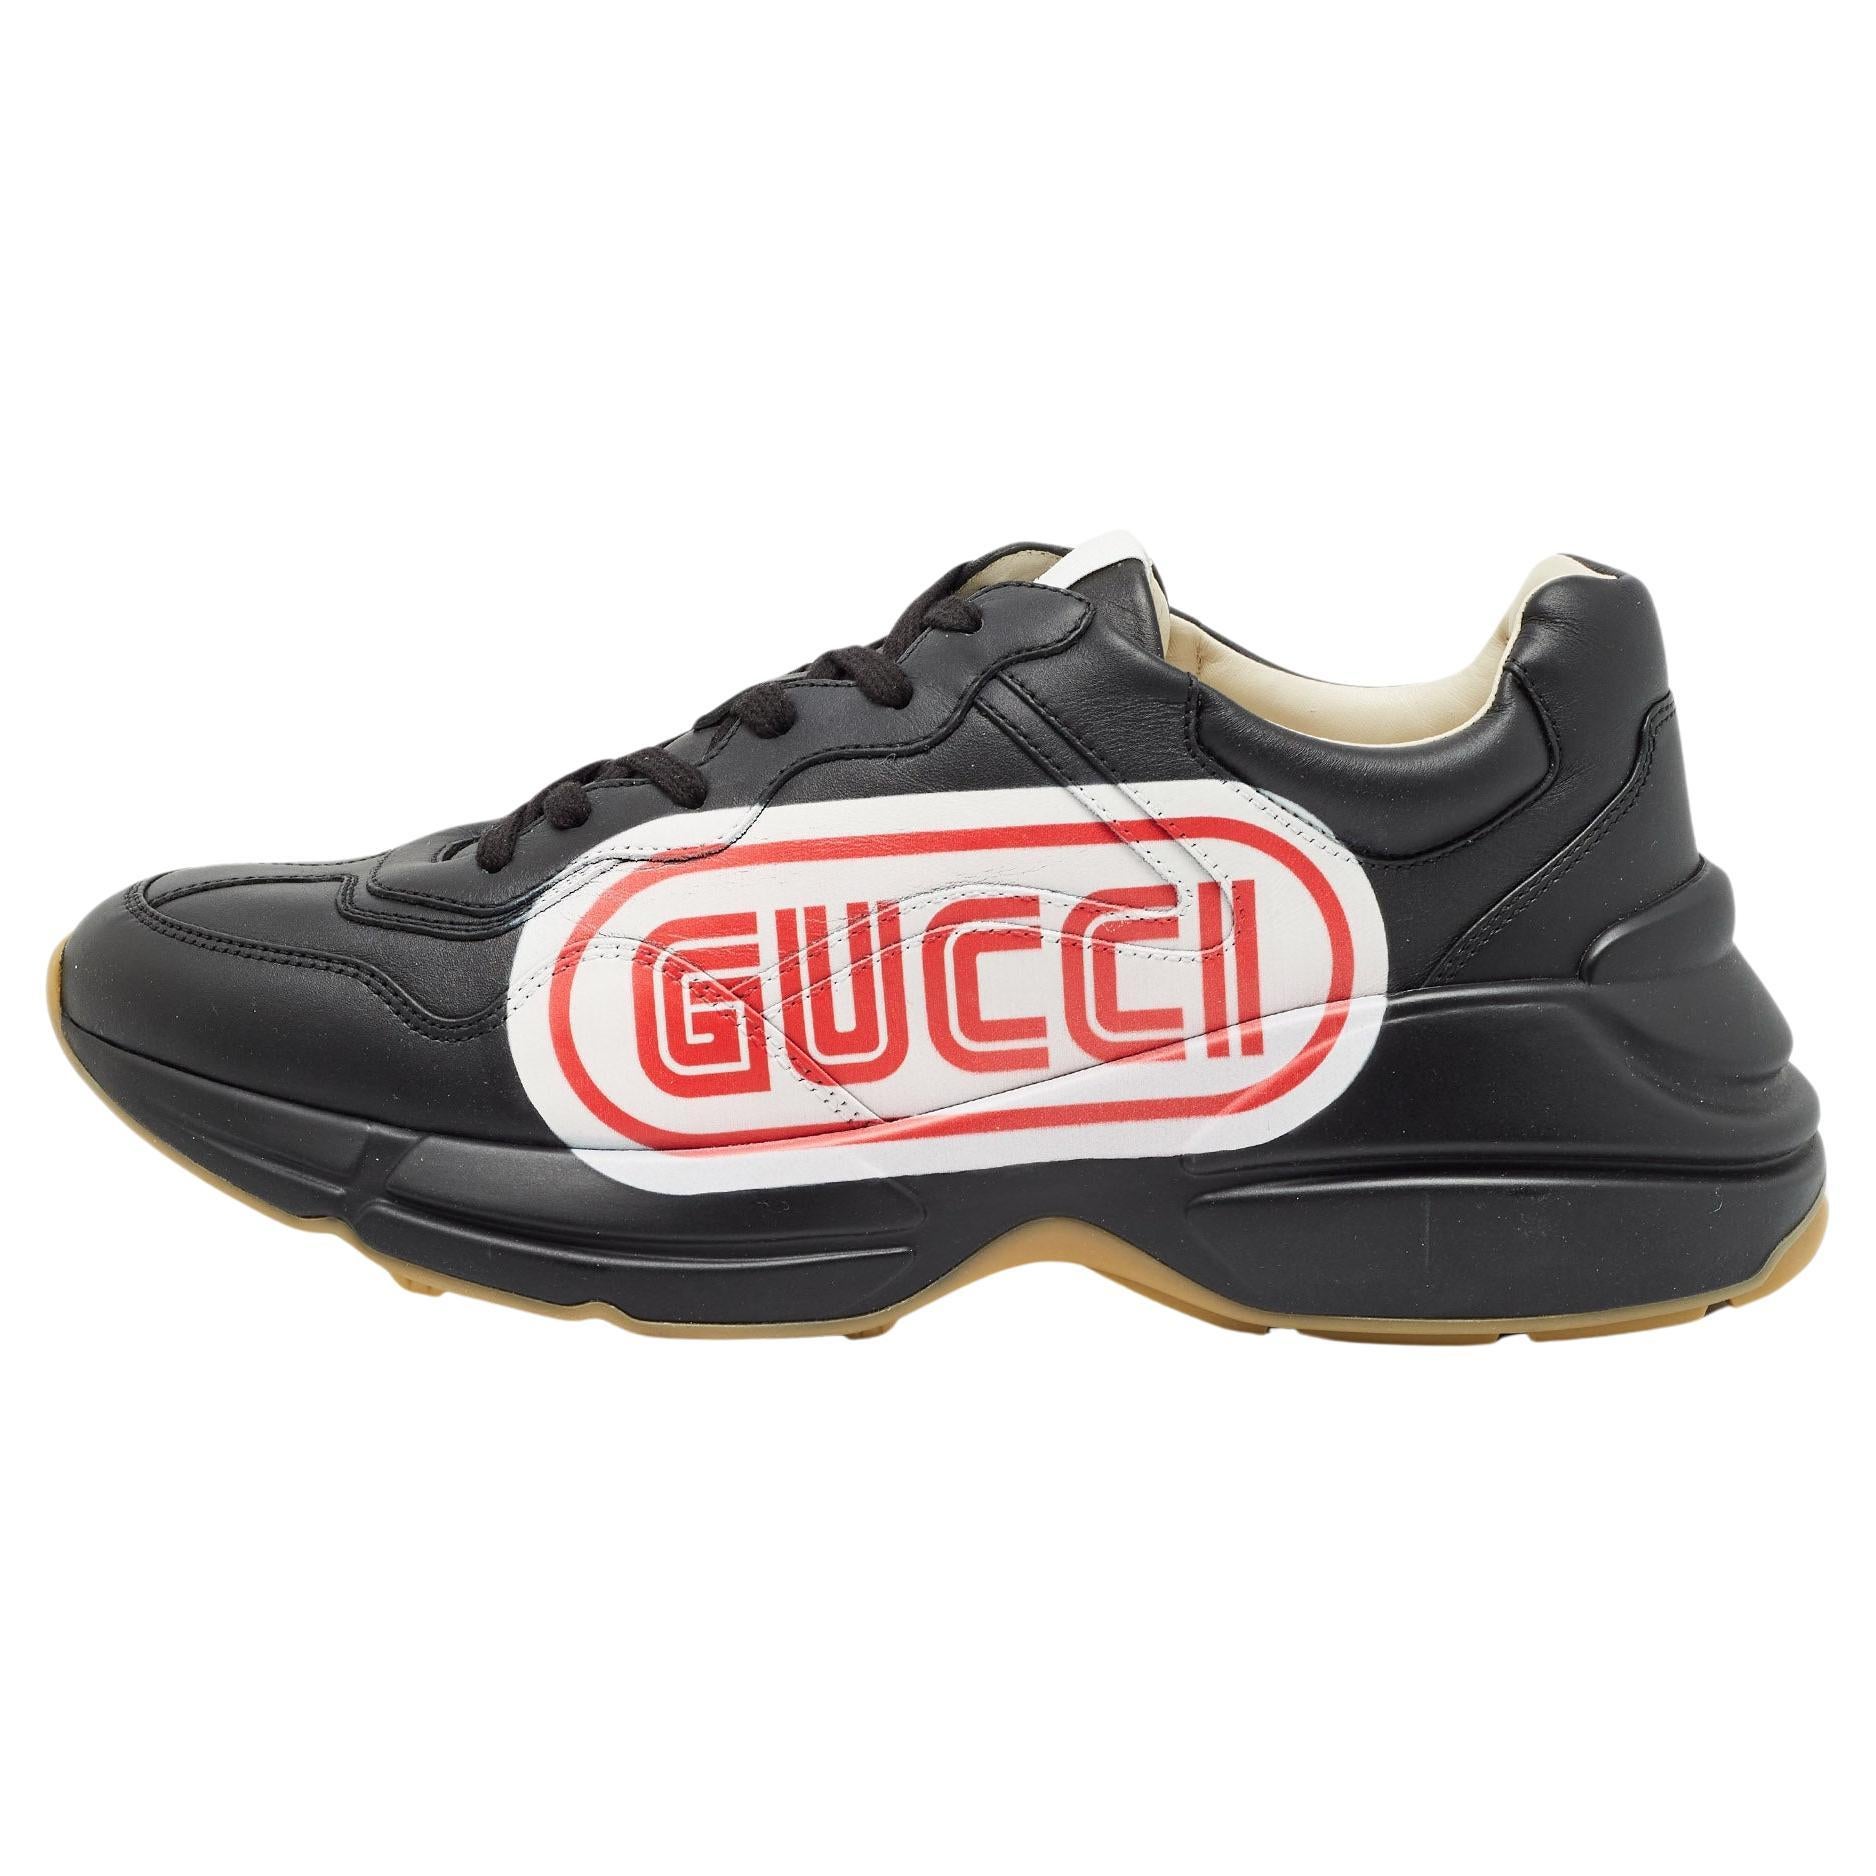 Gucci Black Leather Logo Rhyton Sneakers Size 41 For Sale